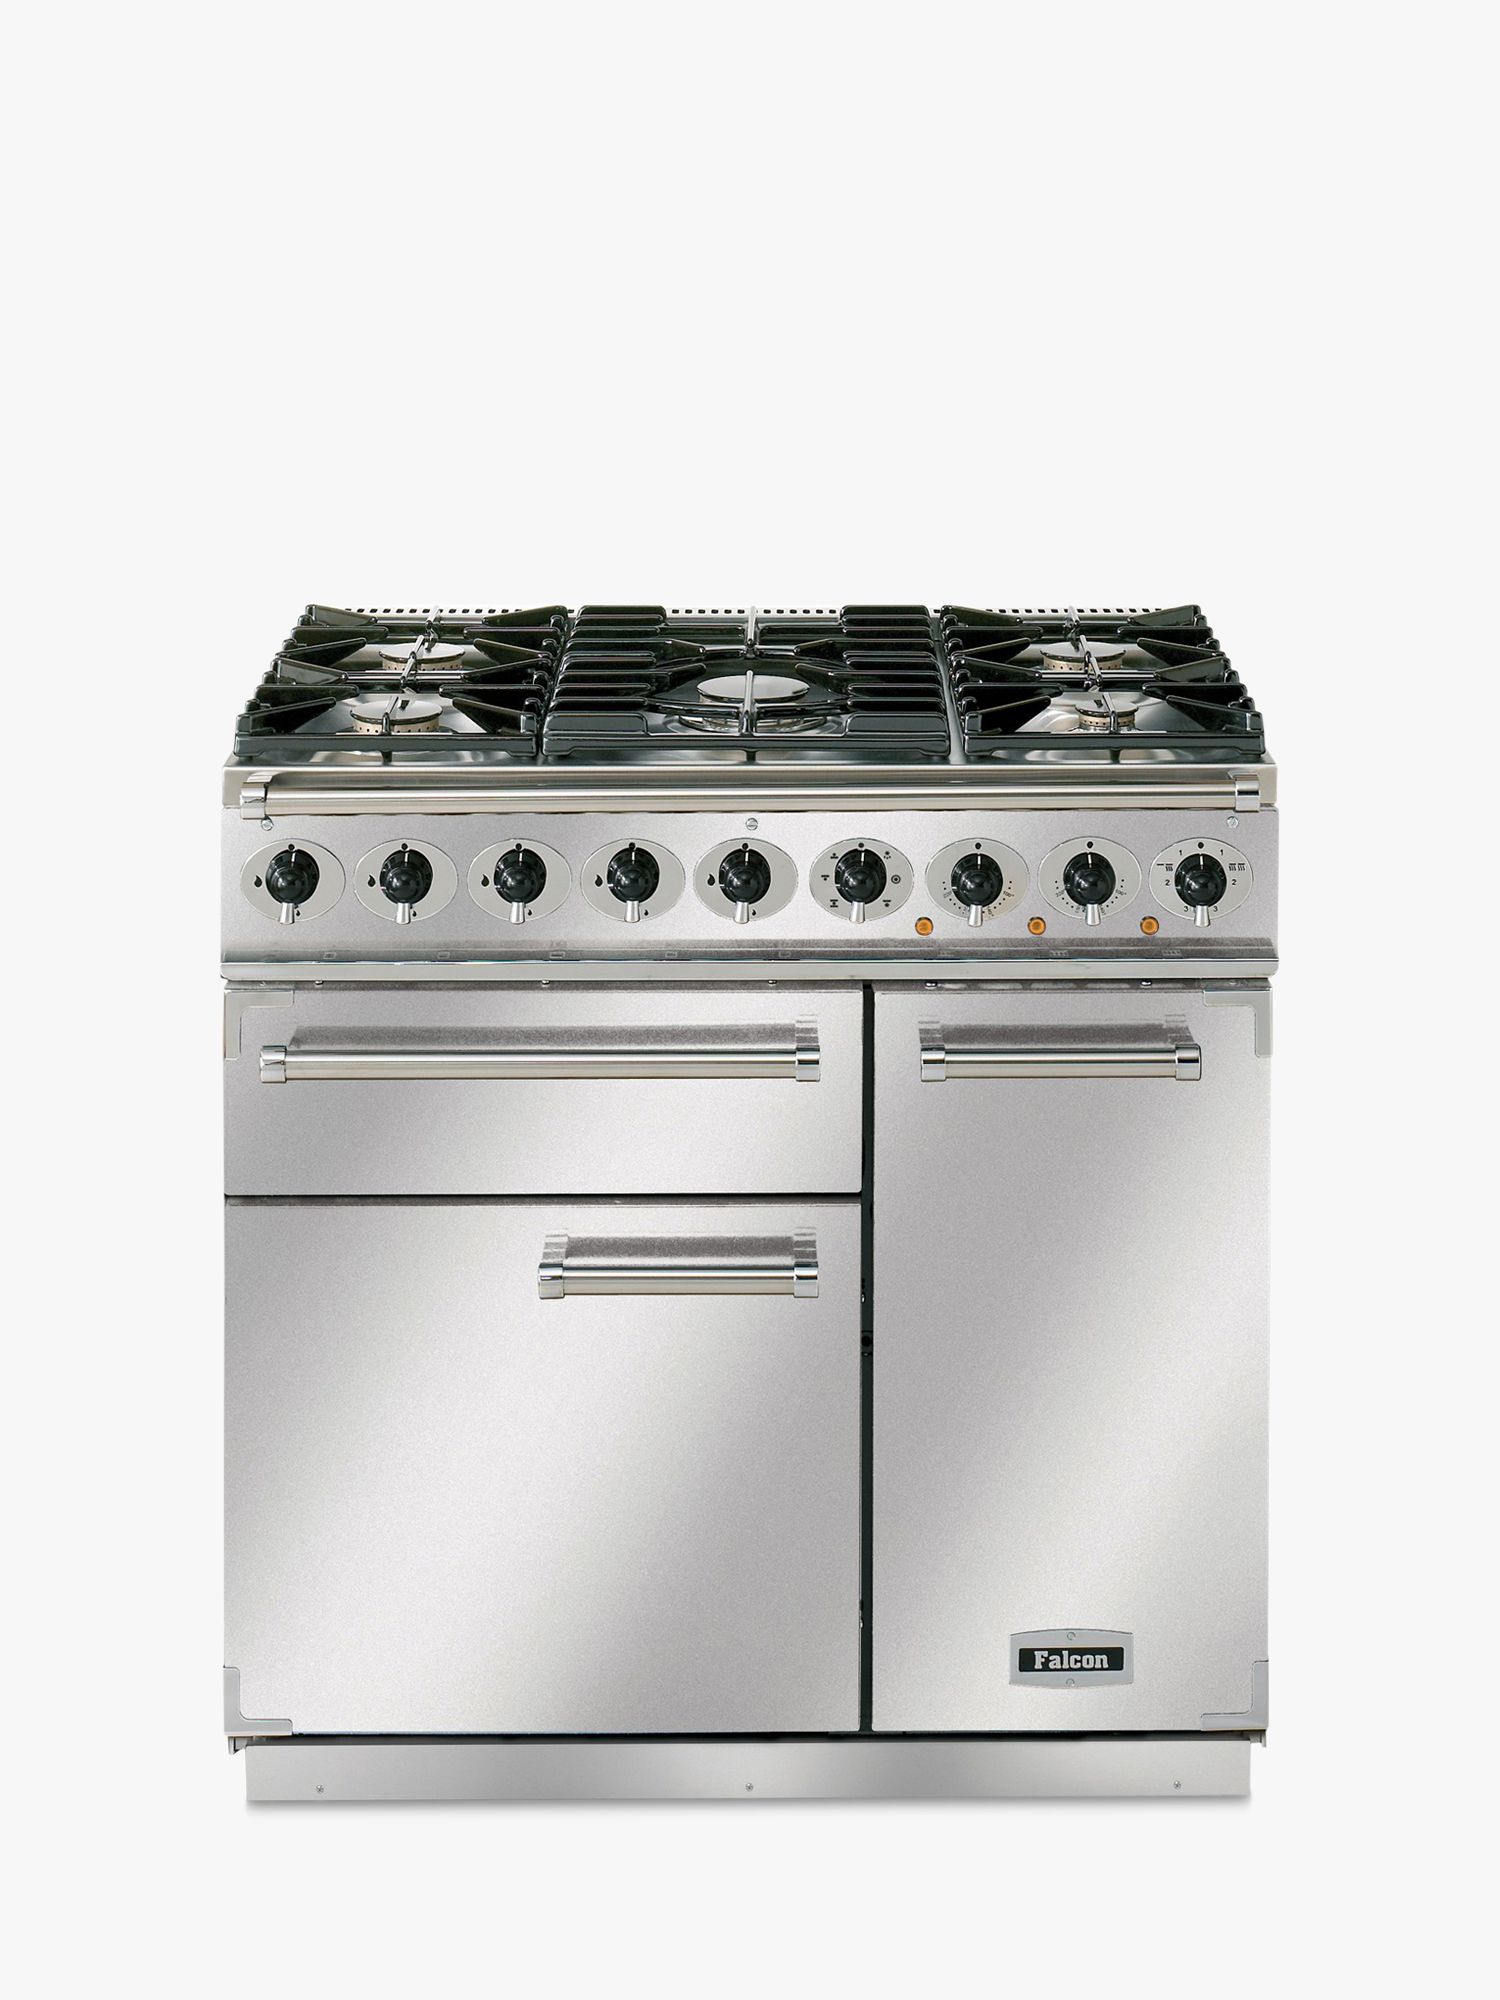 Falcon 900 Deluxe Dual Fuel Range Cooker, Stainless Steel at John Lewis